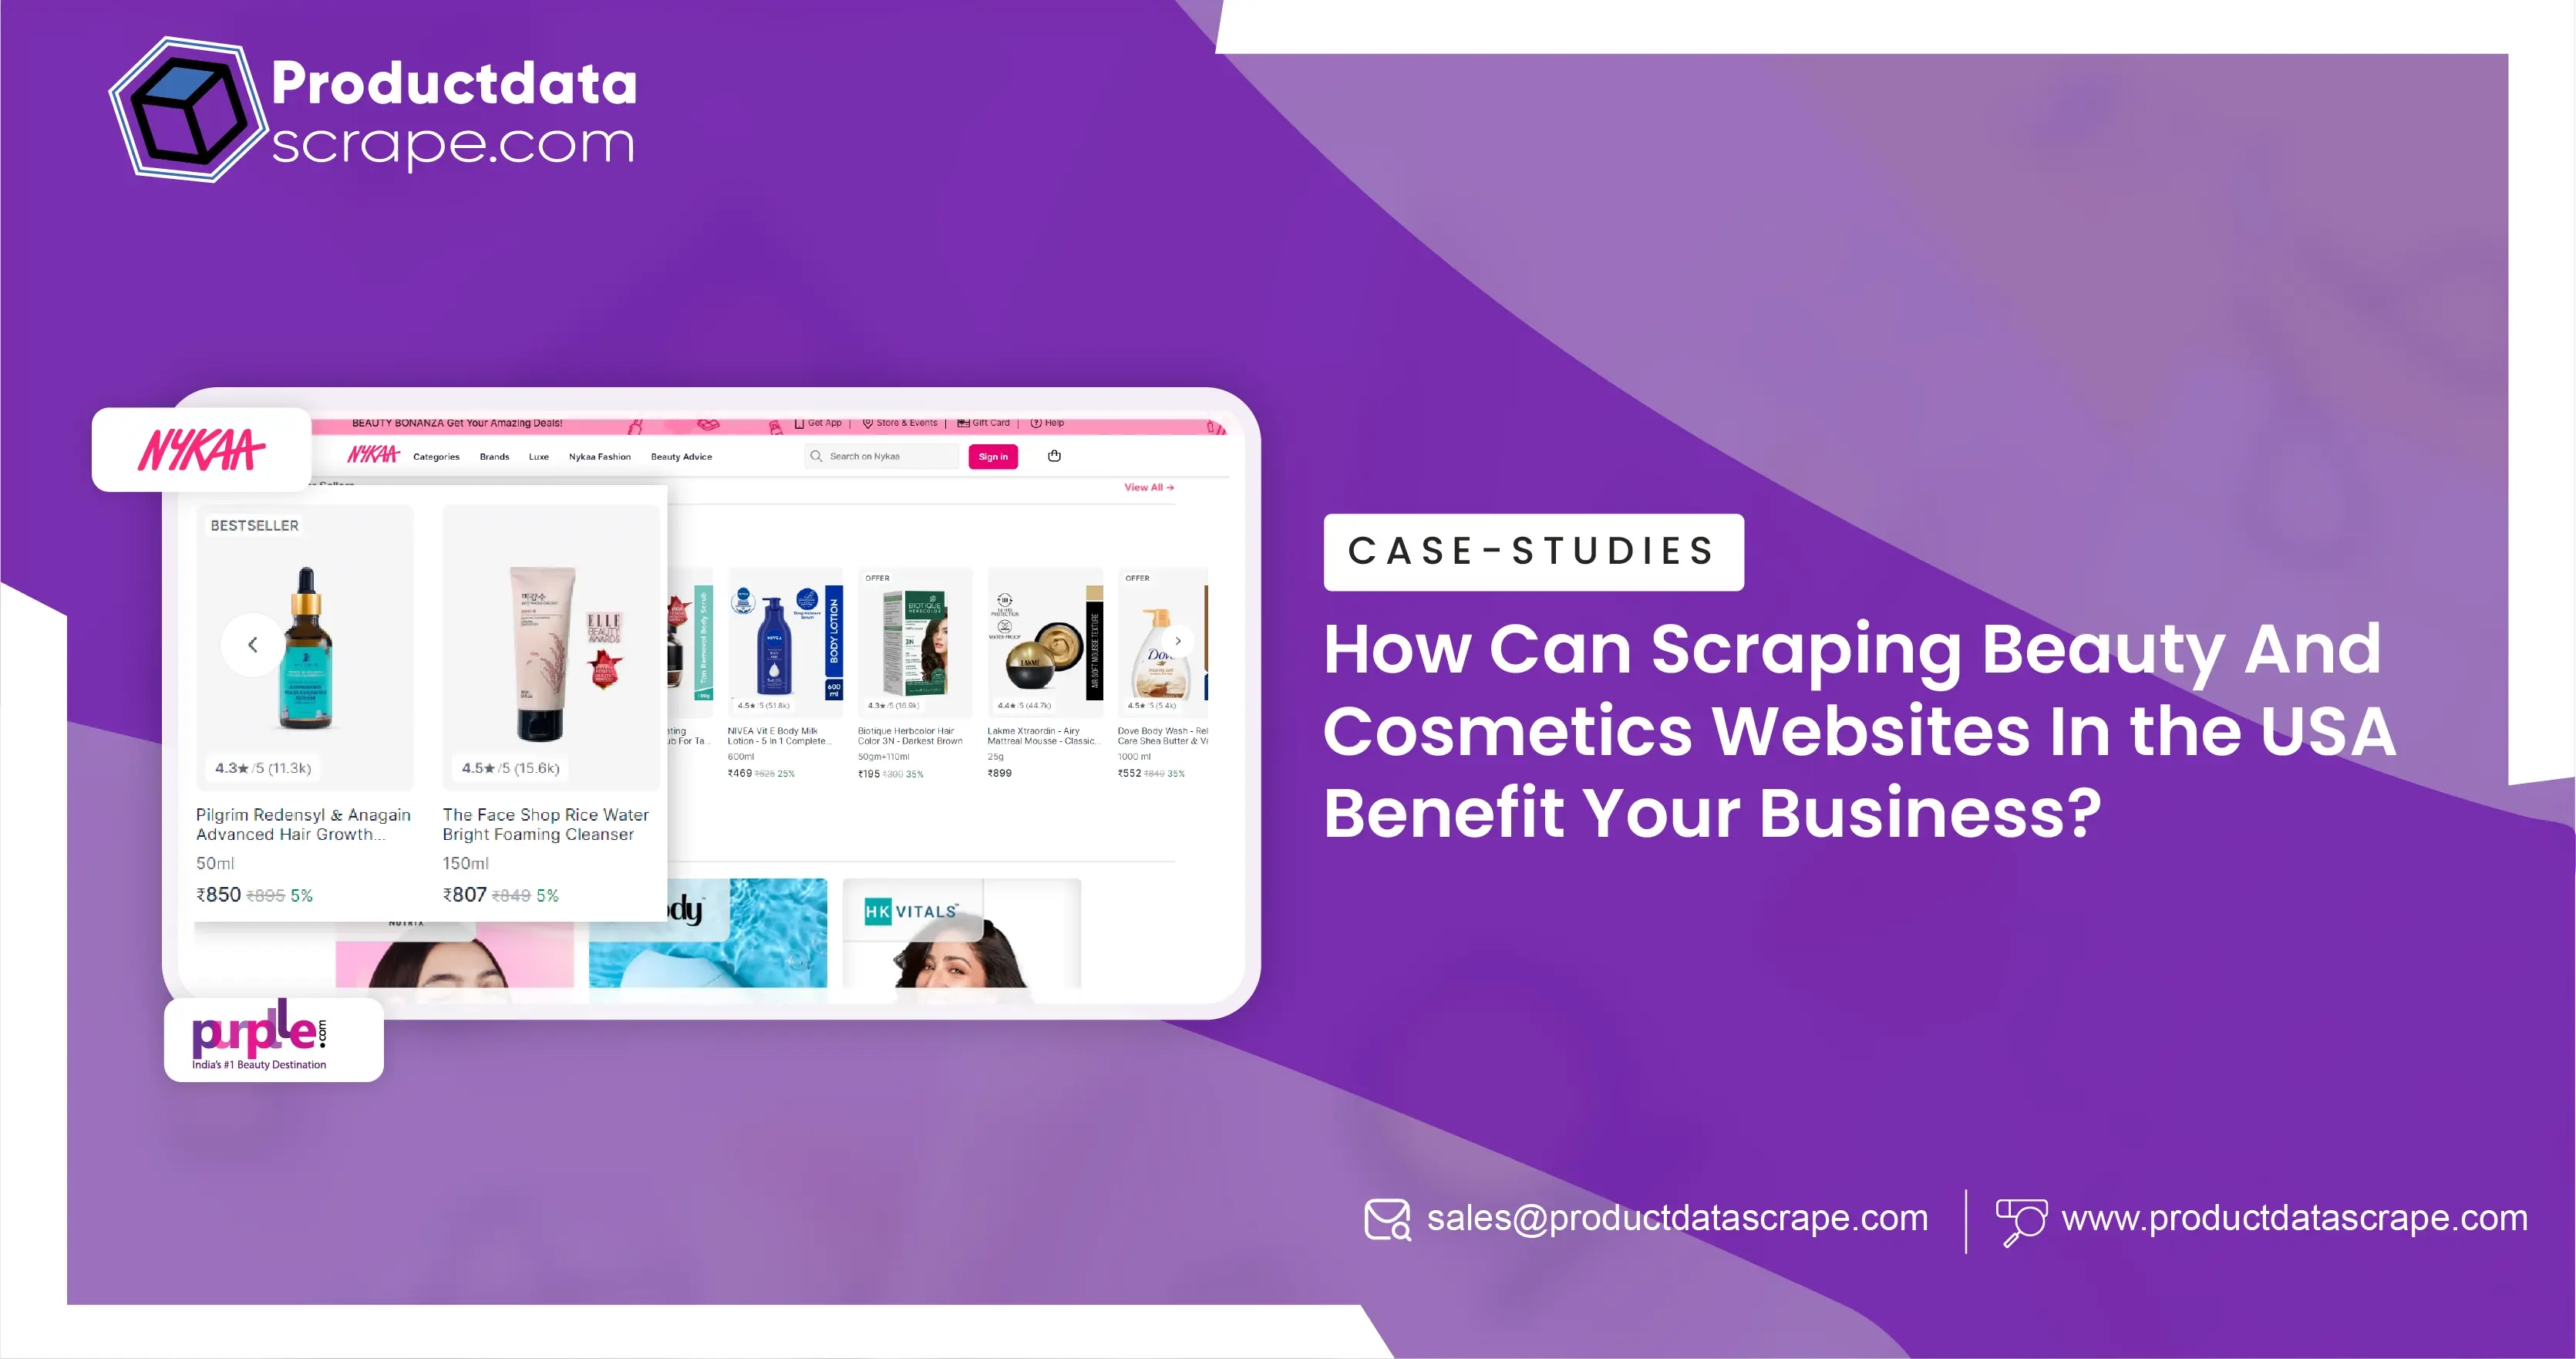 How-Can-Scraping-Beauty-And-Cosmetics-Websites-In-the-USA-Benefit-Your-Business-01